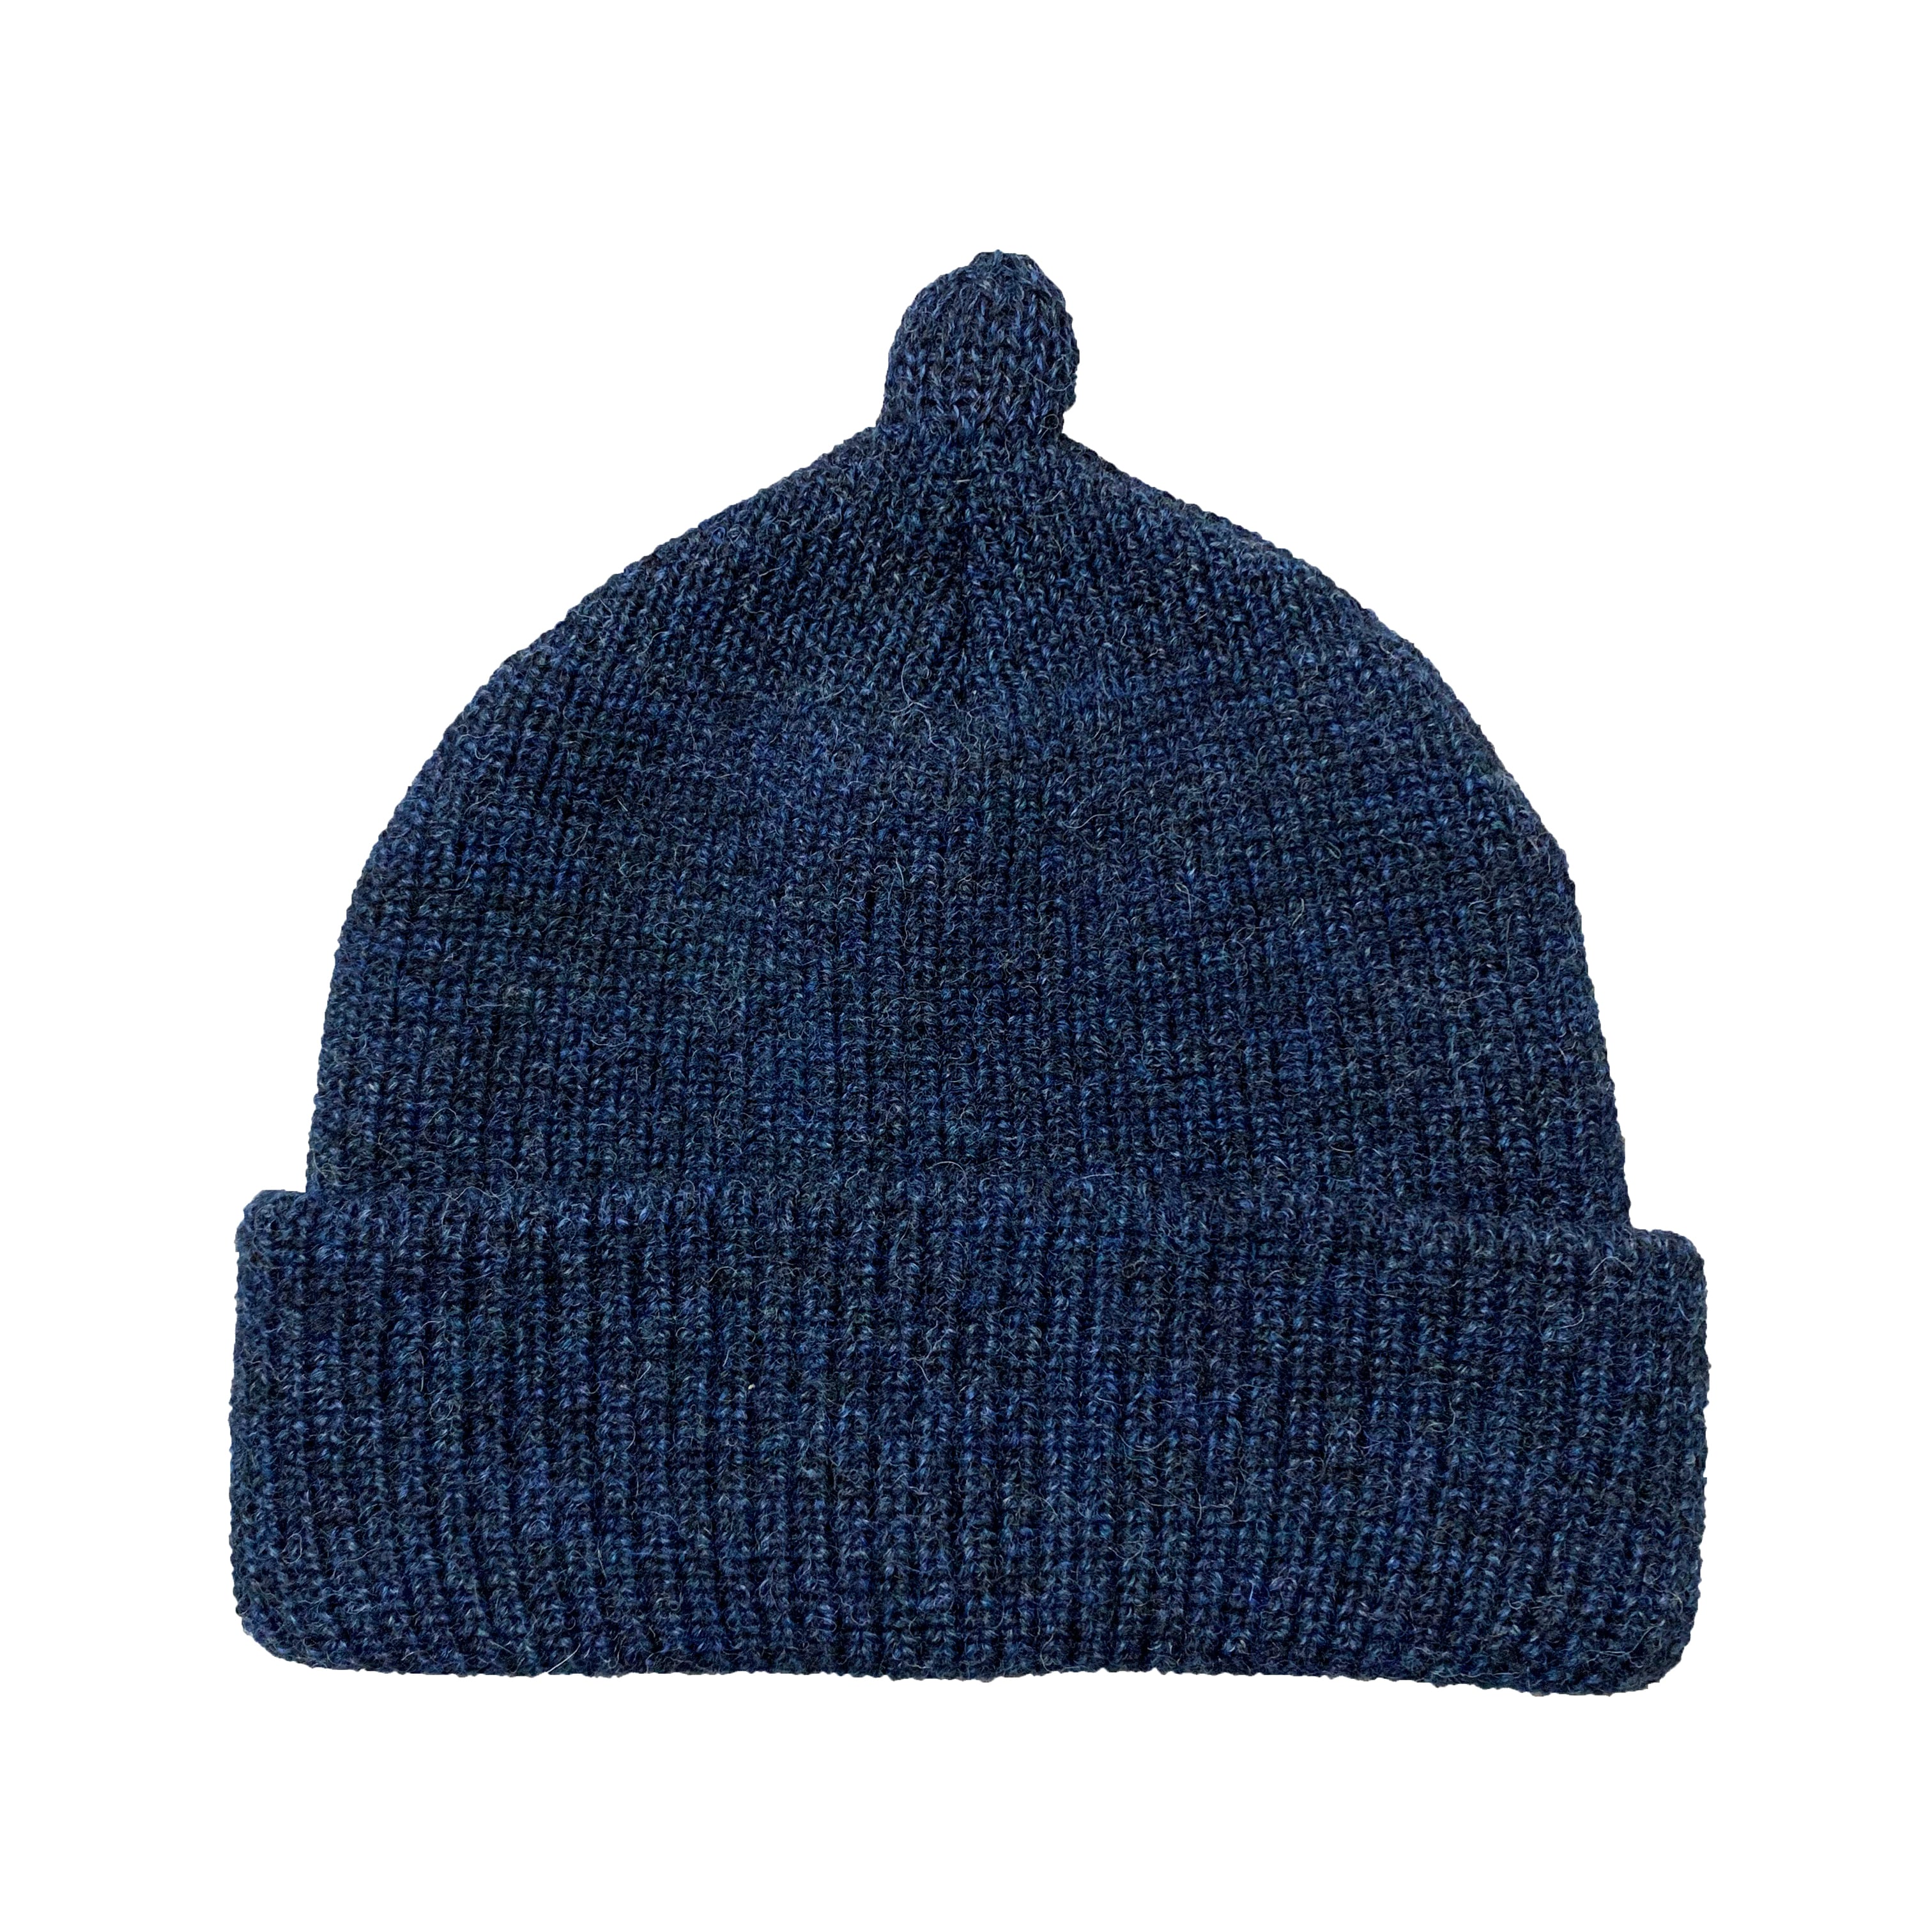 NOROLL / GERMINATE SOLID BEANIE -NAVY- | THE NEWAGE CLUB powered by BASE